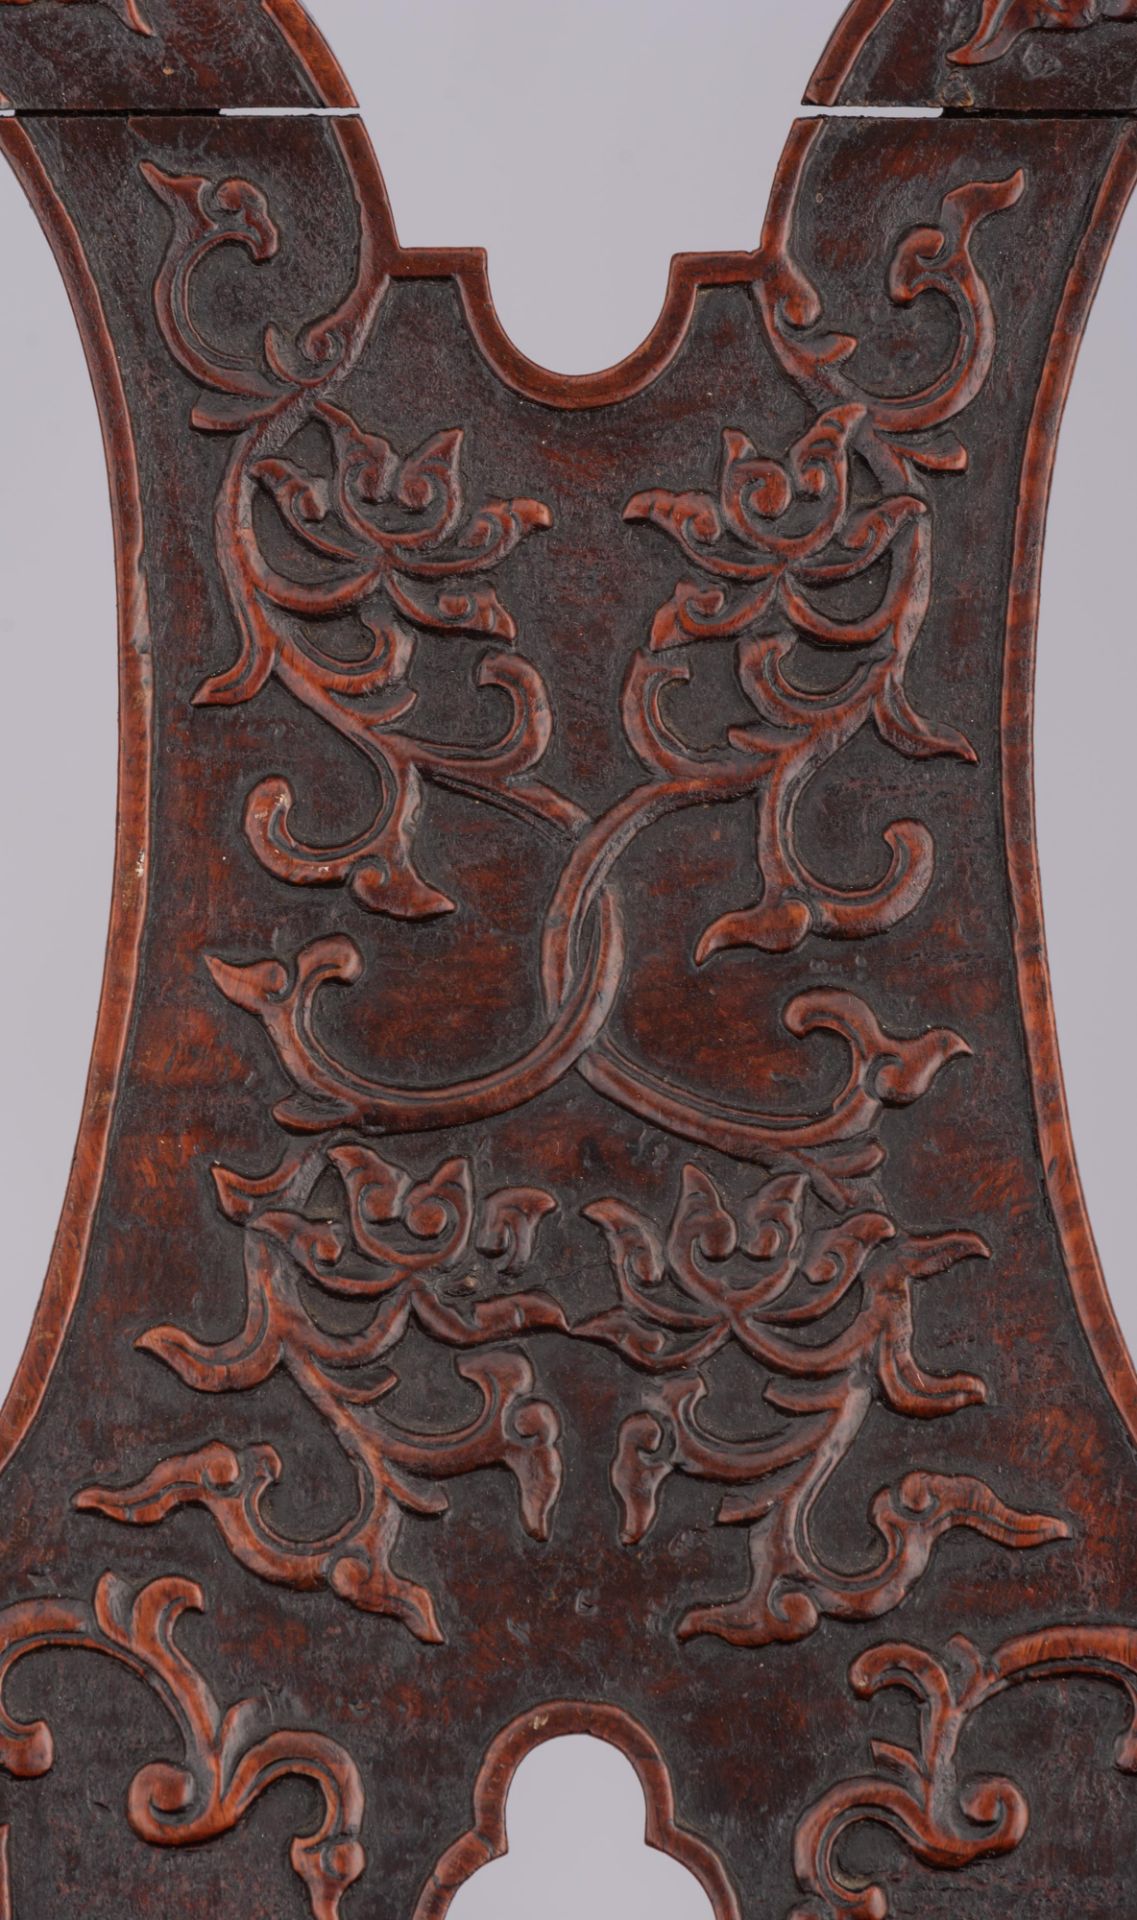 A very rare Chinese export Padouk chair, second half of the 18thC, H 100 - W 55 - D 58 cm - Image 16 of 24